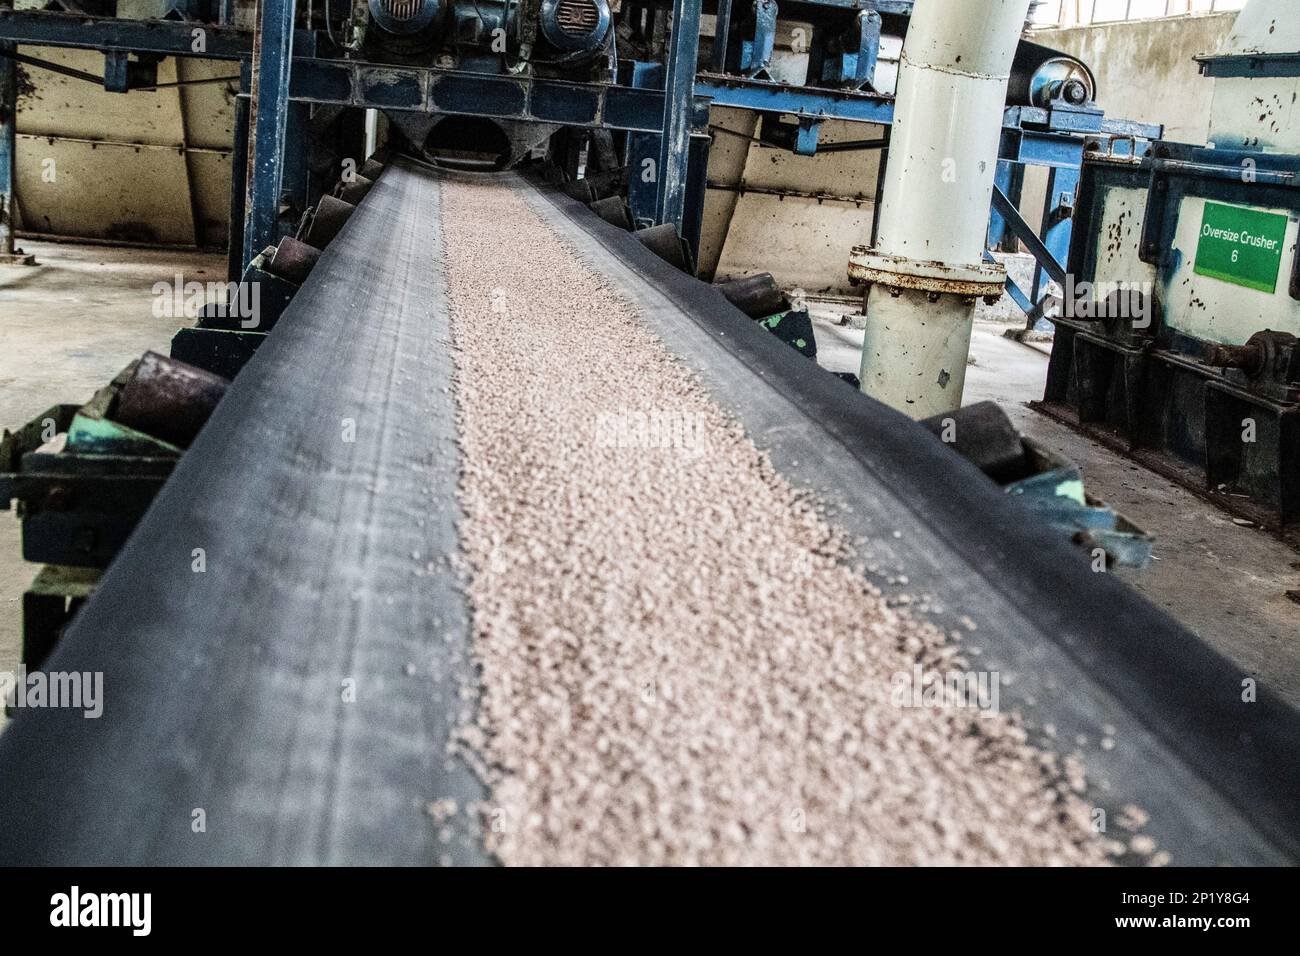 Fertilizer granules move along a conveyor belt at Fertiplant's granulation factory in Nakuru. Fertiplant, a local fertilizer plant, is expected to address the fertilizer deficit in Kenya ahead of the planting season. The Nitrogen, Phosphorous and Potassium, (NPK) fertilizer granulation company has an annual capacity of 100, 000 tonnes, while Kenya's annual fertilizer consumption stands at 500,000 tonnes per annum. During the commissioning of the company, President William Ruto announced that the government plans to eliminate generic fertilizers that have been altering soil pH. Stock Photo